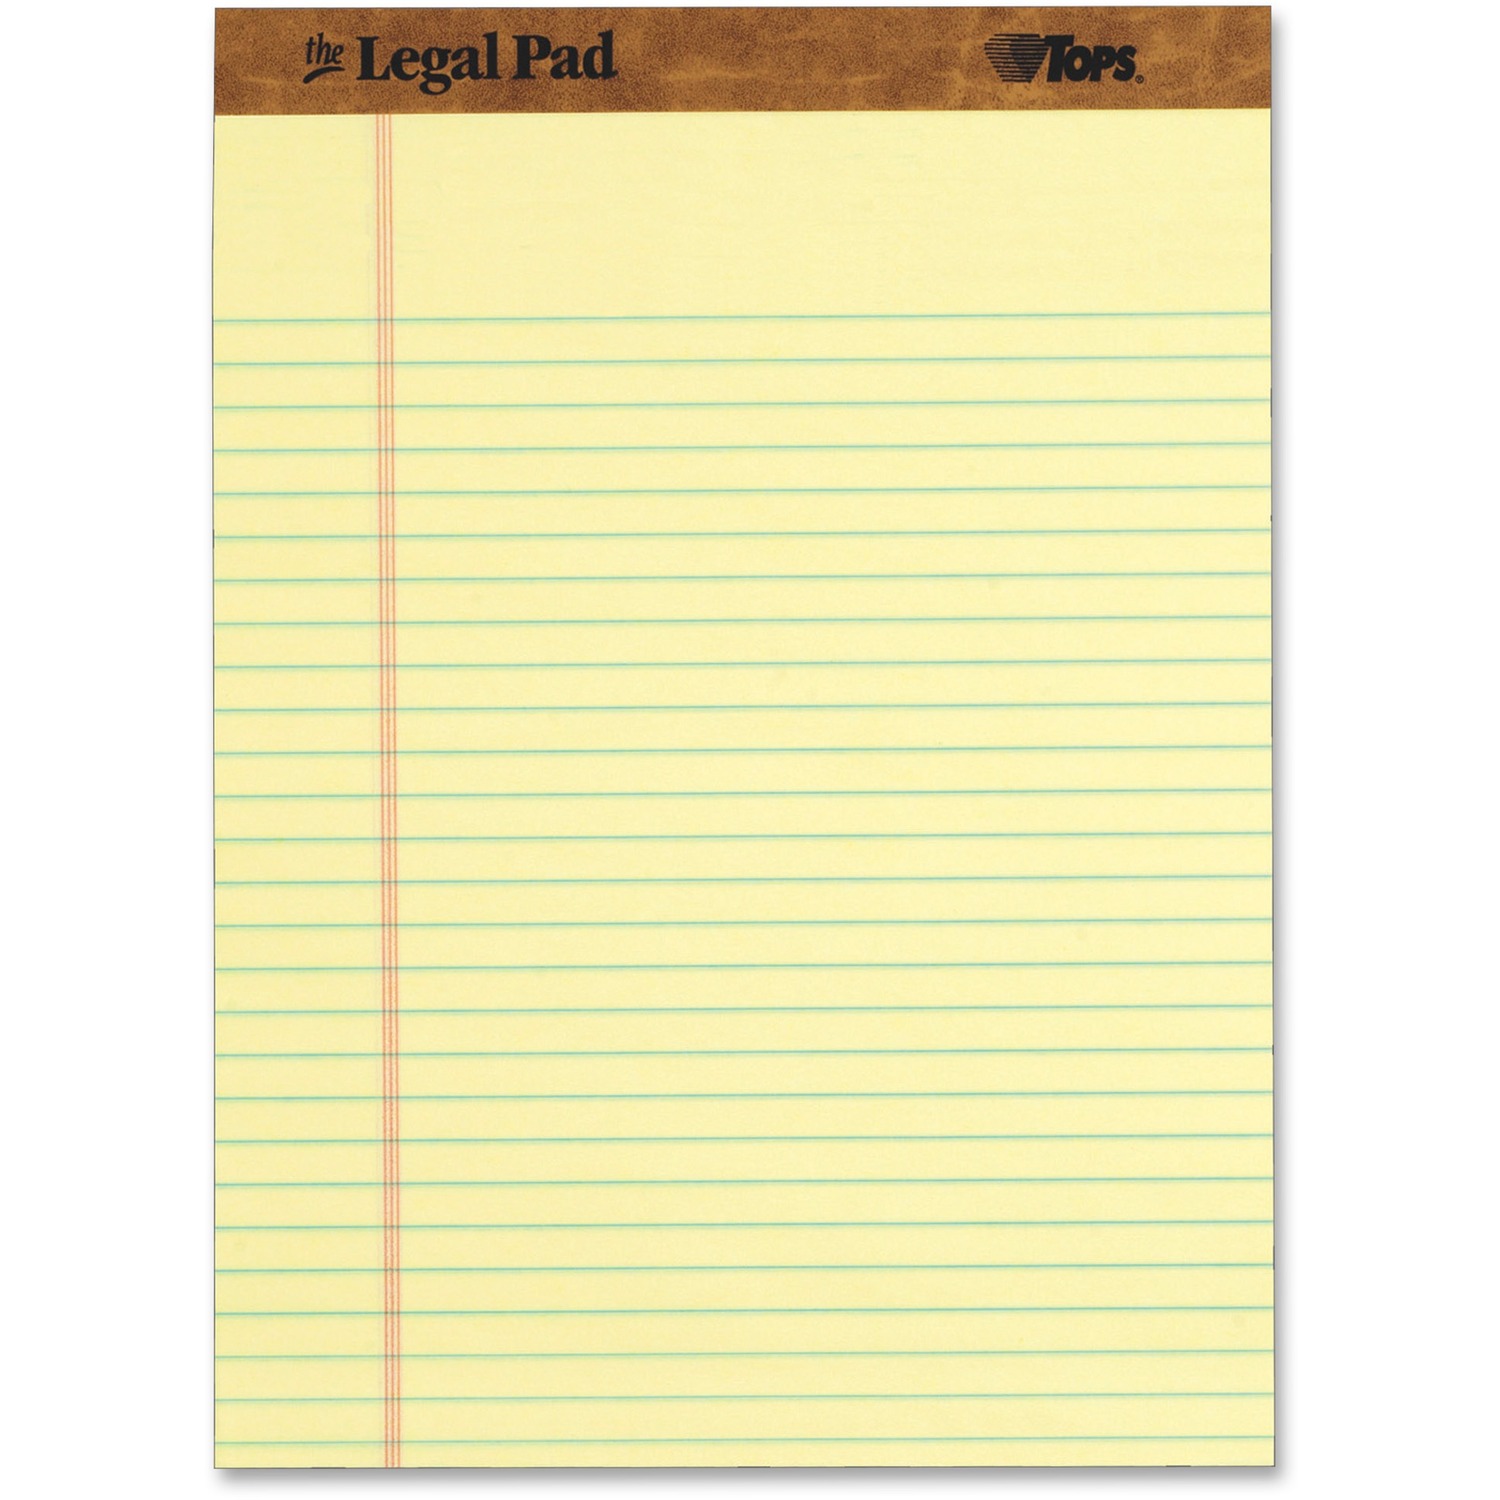 TOPS The Legal Pads, 12 Pack, Legal Rule, Perforated, 50 Sheets, 8-1/2" x 11-3/4", Canary (7532) - image 2 of 8